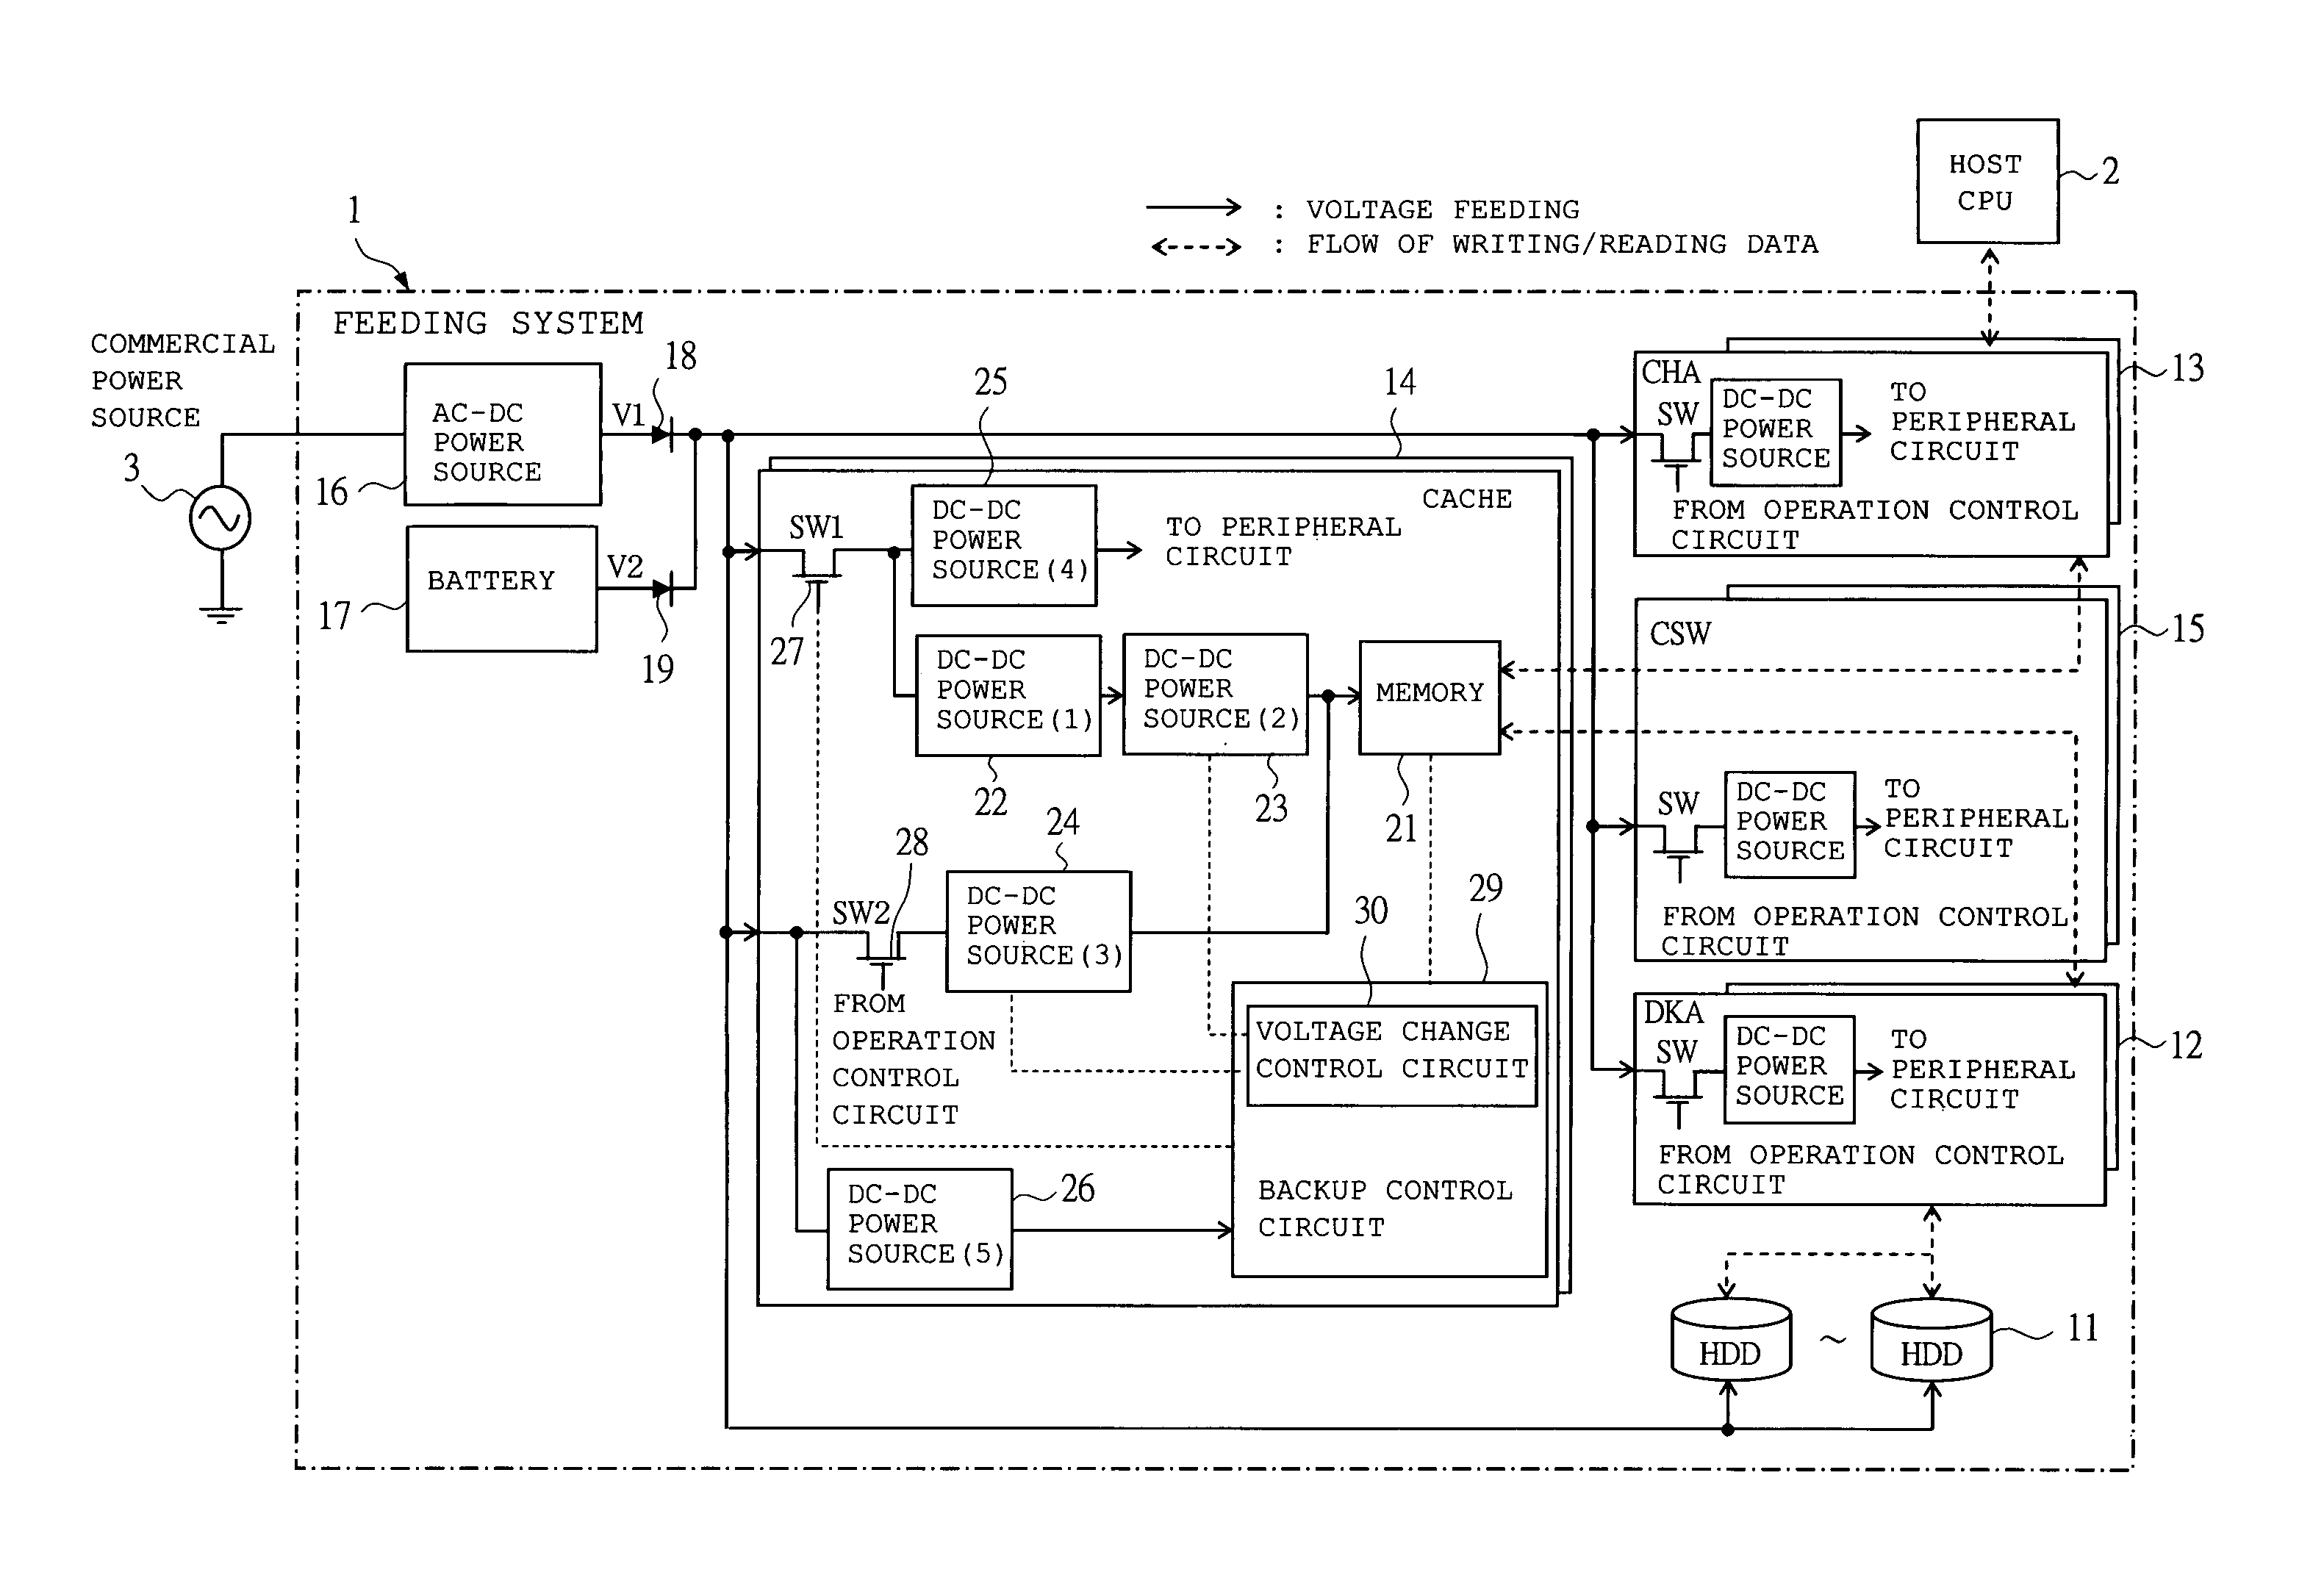 Storage unit having normal and backup power sources for use in retaining data when normal power fails